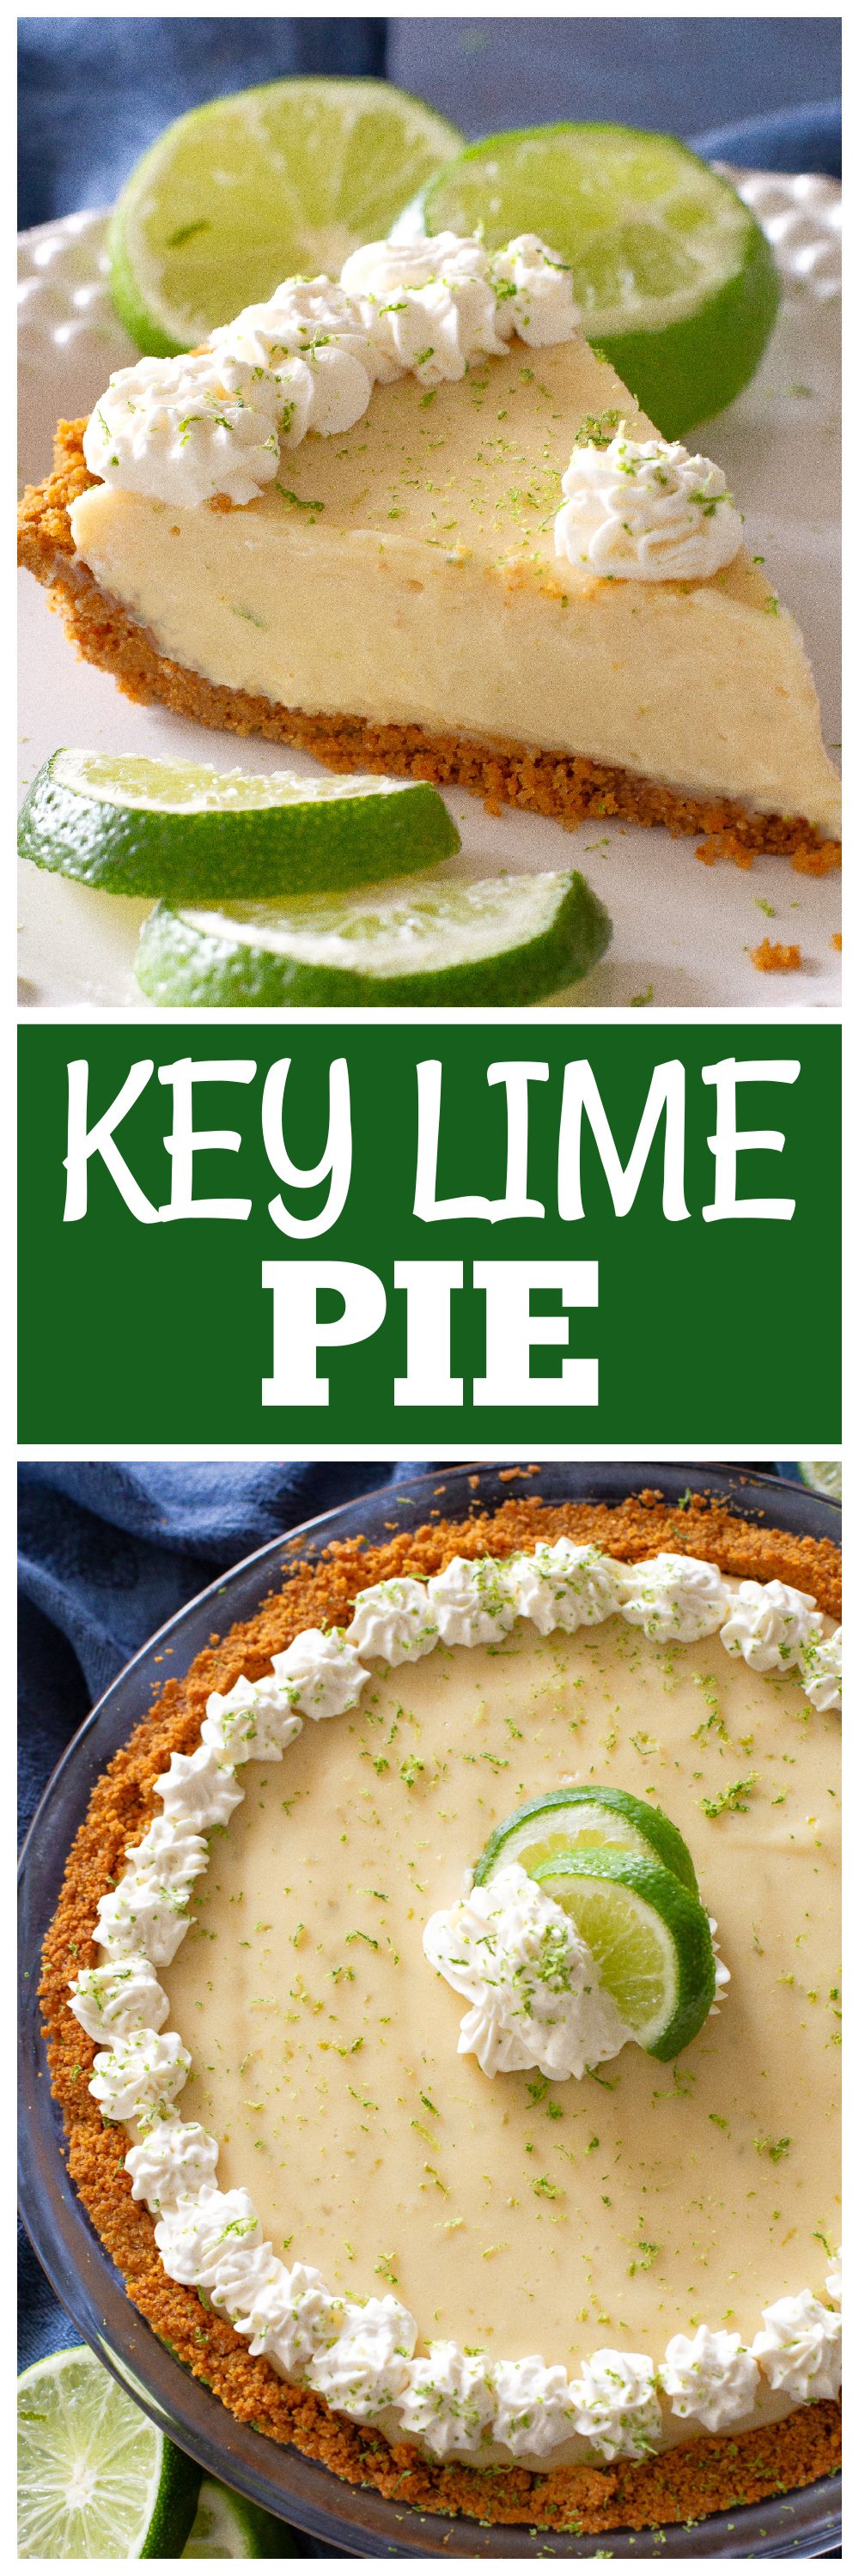 Key Lime Pie with whipped cream